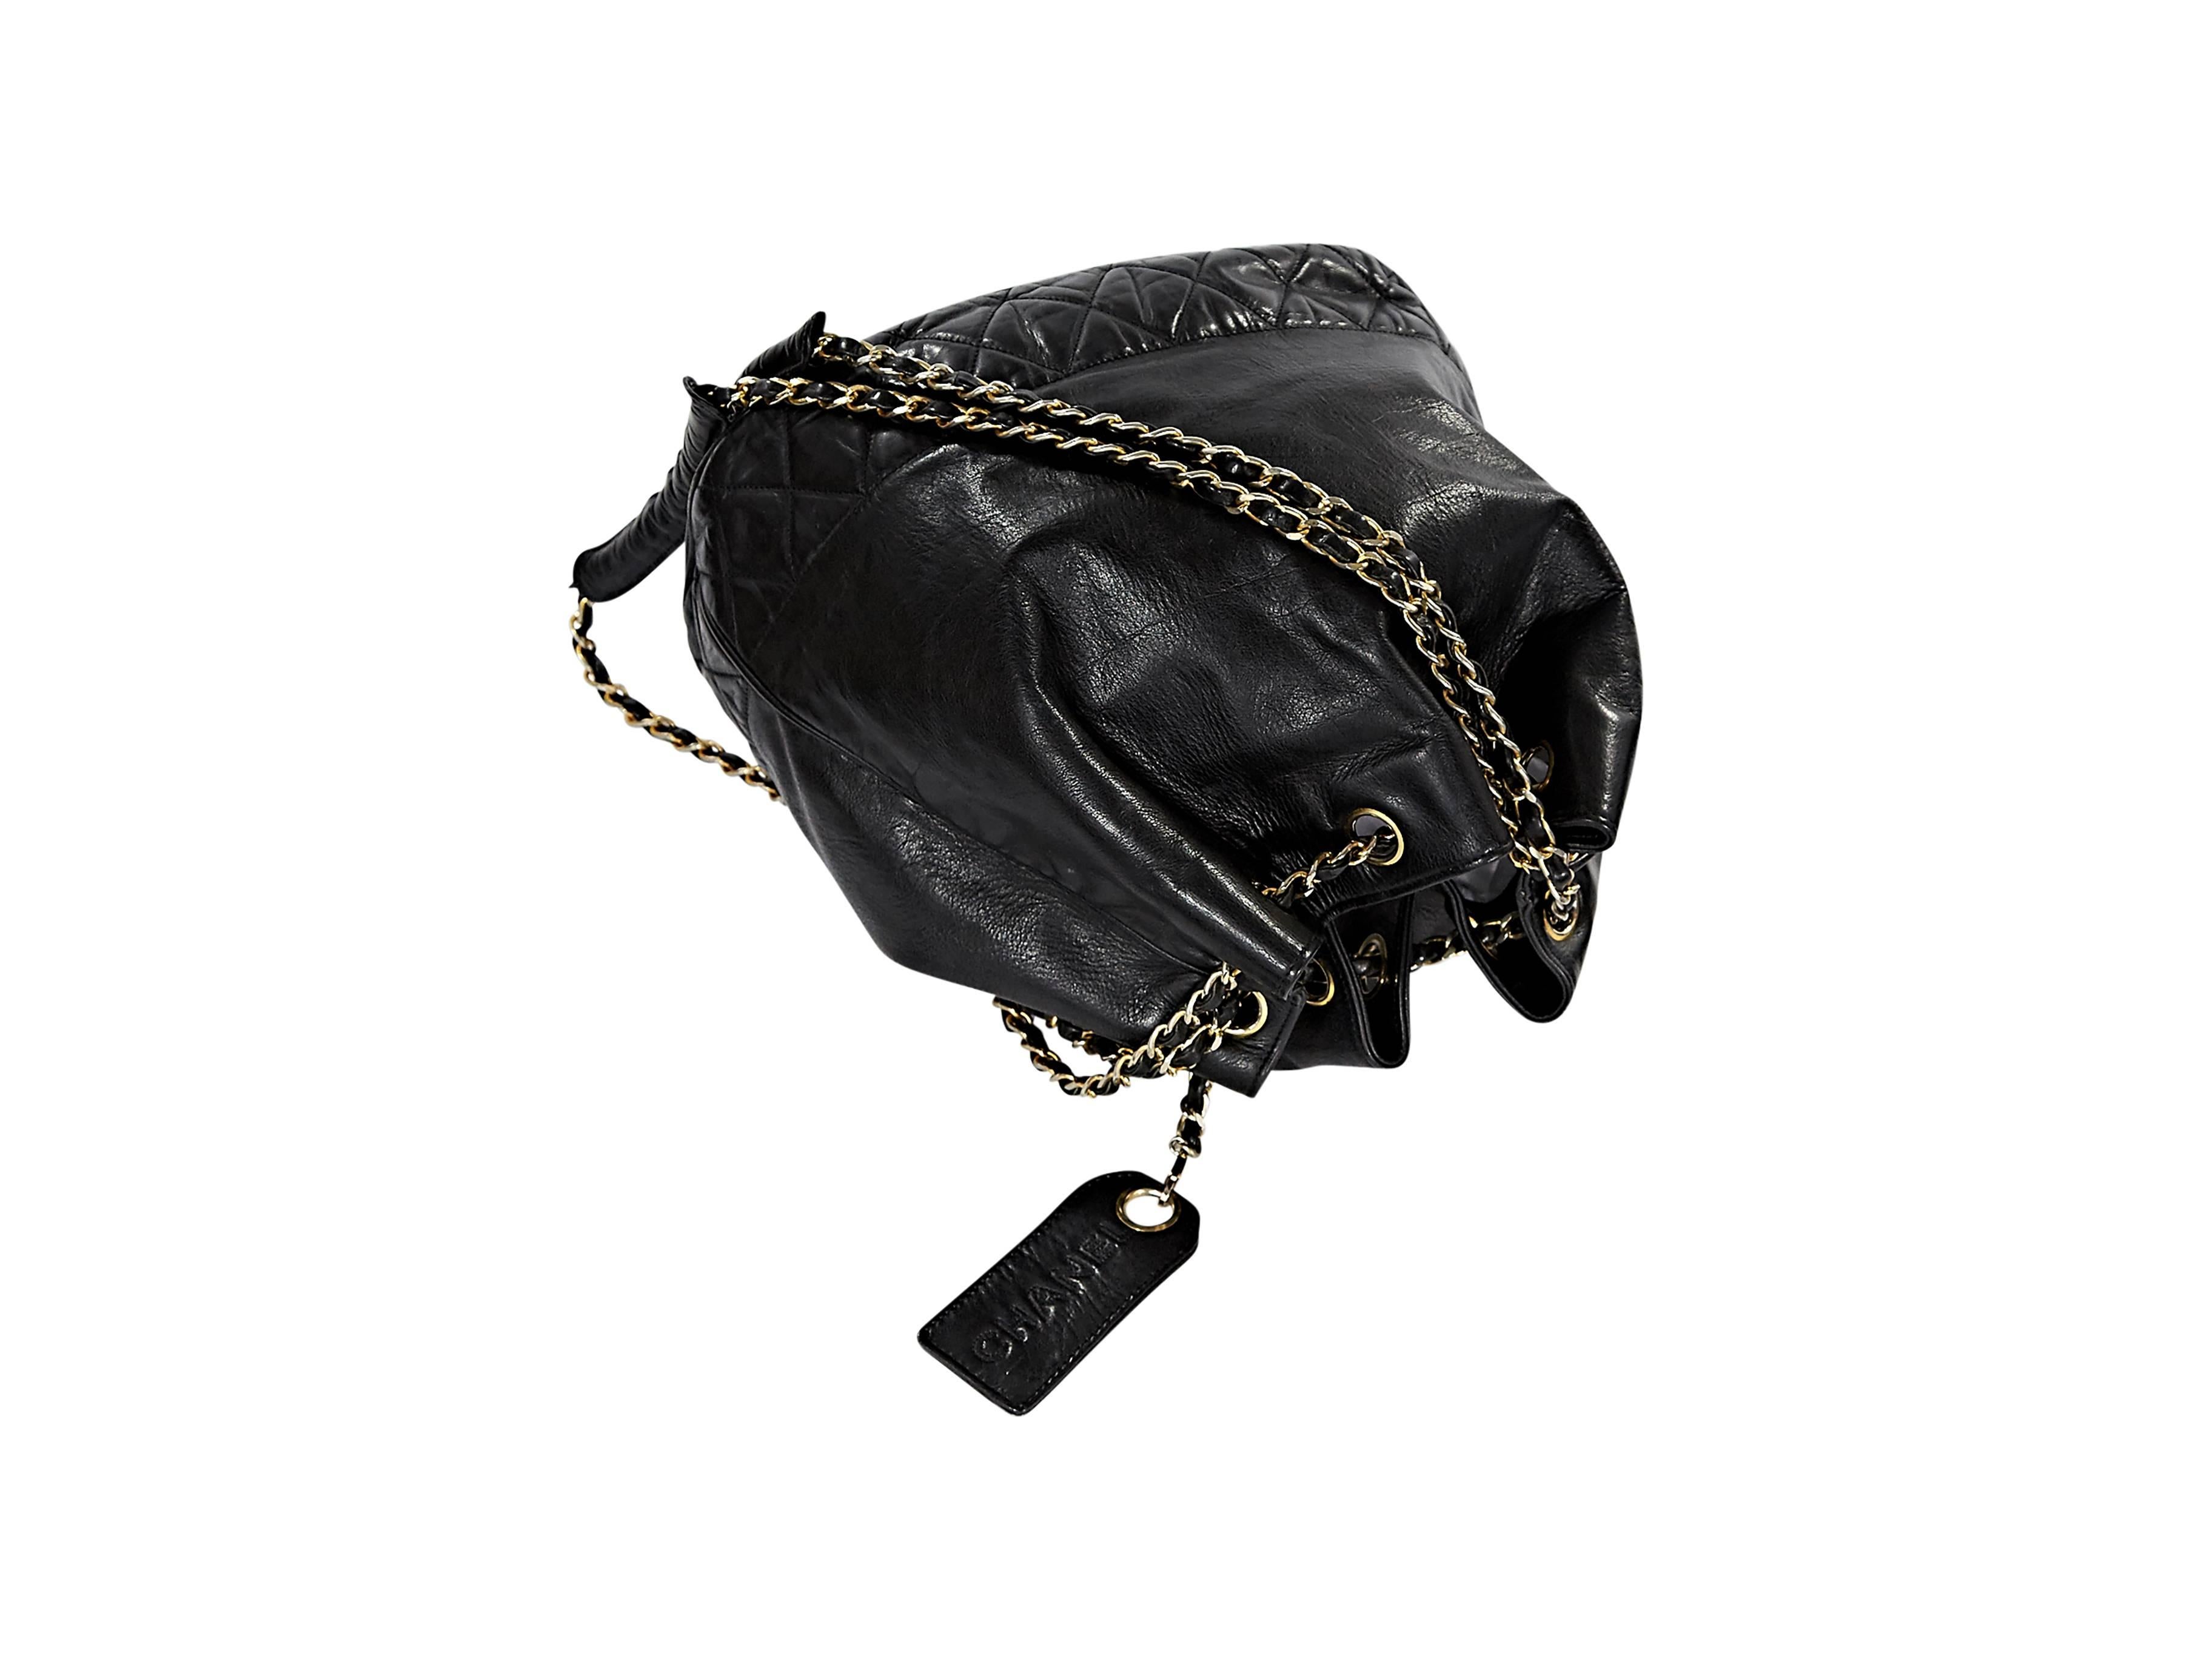 Black leather bucket bag by Chanel.  Double woven leather chain straps.  Drawstring closure.  Hanging embossed logo tag.  Quilted trimmed bottom.  Goldtone hardware.  